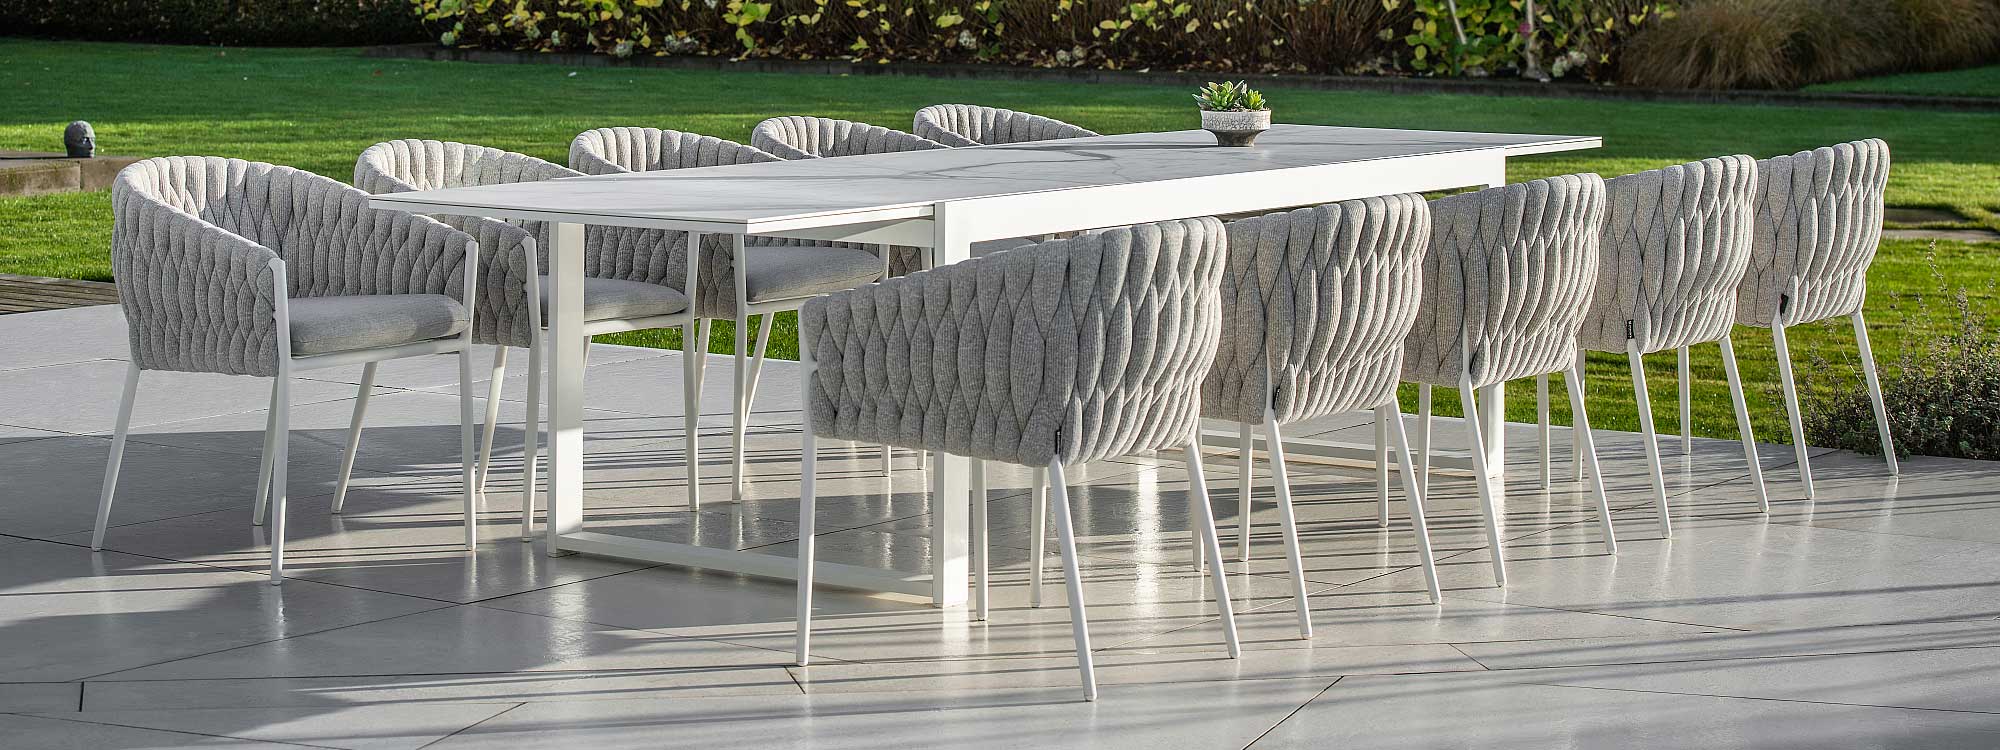 Image of white-grey Fortuna Socks with Vigo XL extending garden table on terrace, with lawn and shrubs in background